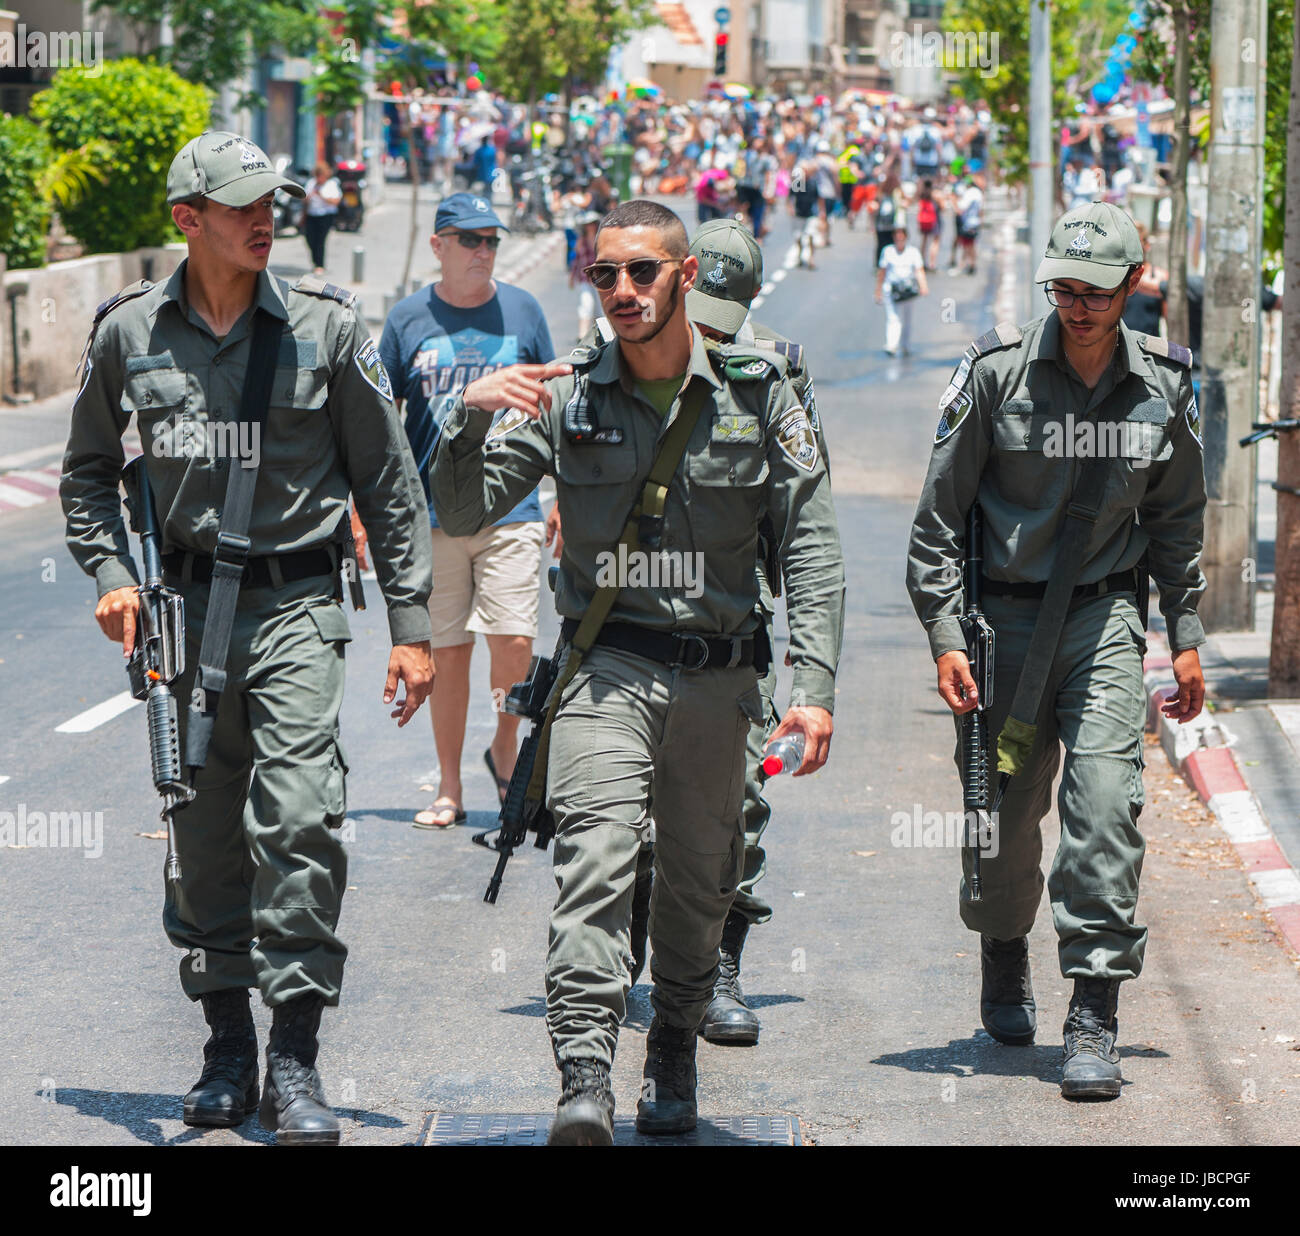 Tel Aviv, Israel - 9th June, 2017: Security forces at the city streets during the Gay Parade Credit: Yuri Turkov/Alamy Live News Stock Photo